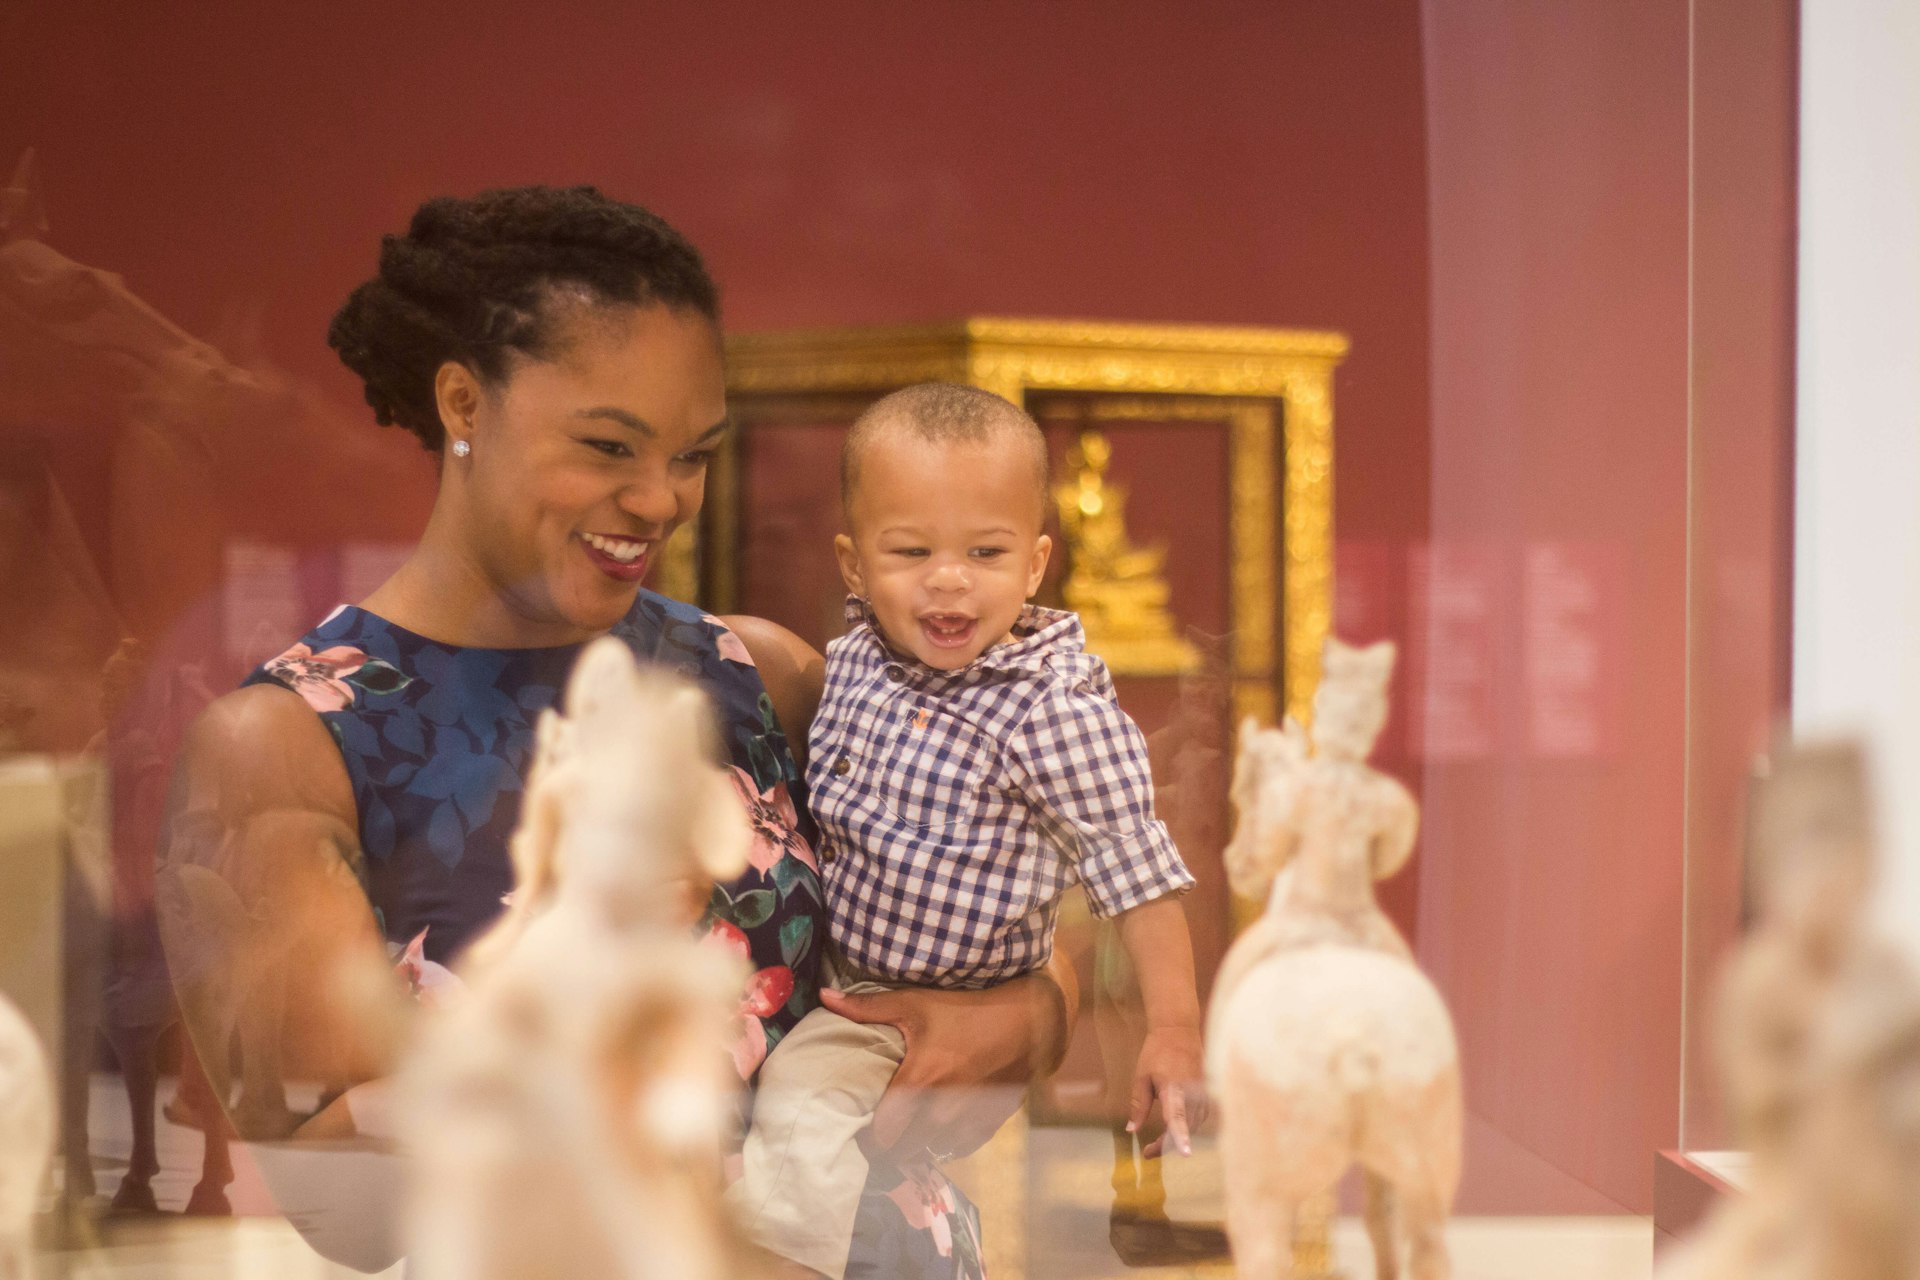 A woman holding a small child and looking at a display at the Crocker Art Museum, Sacramento